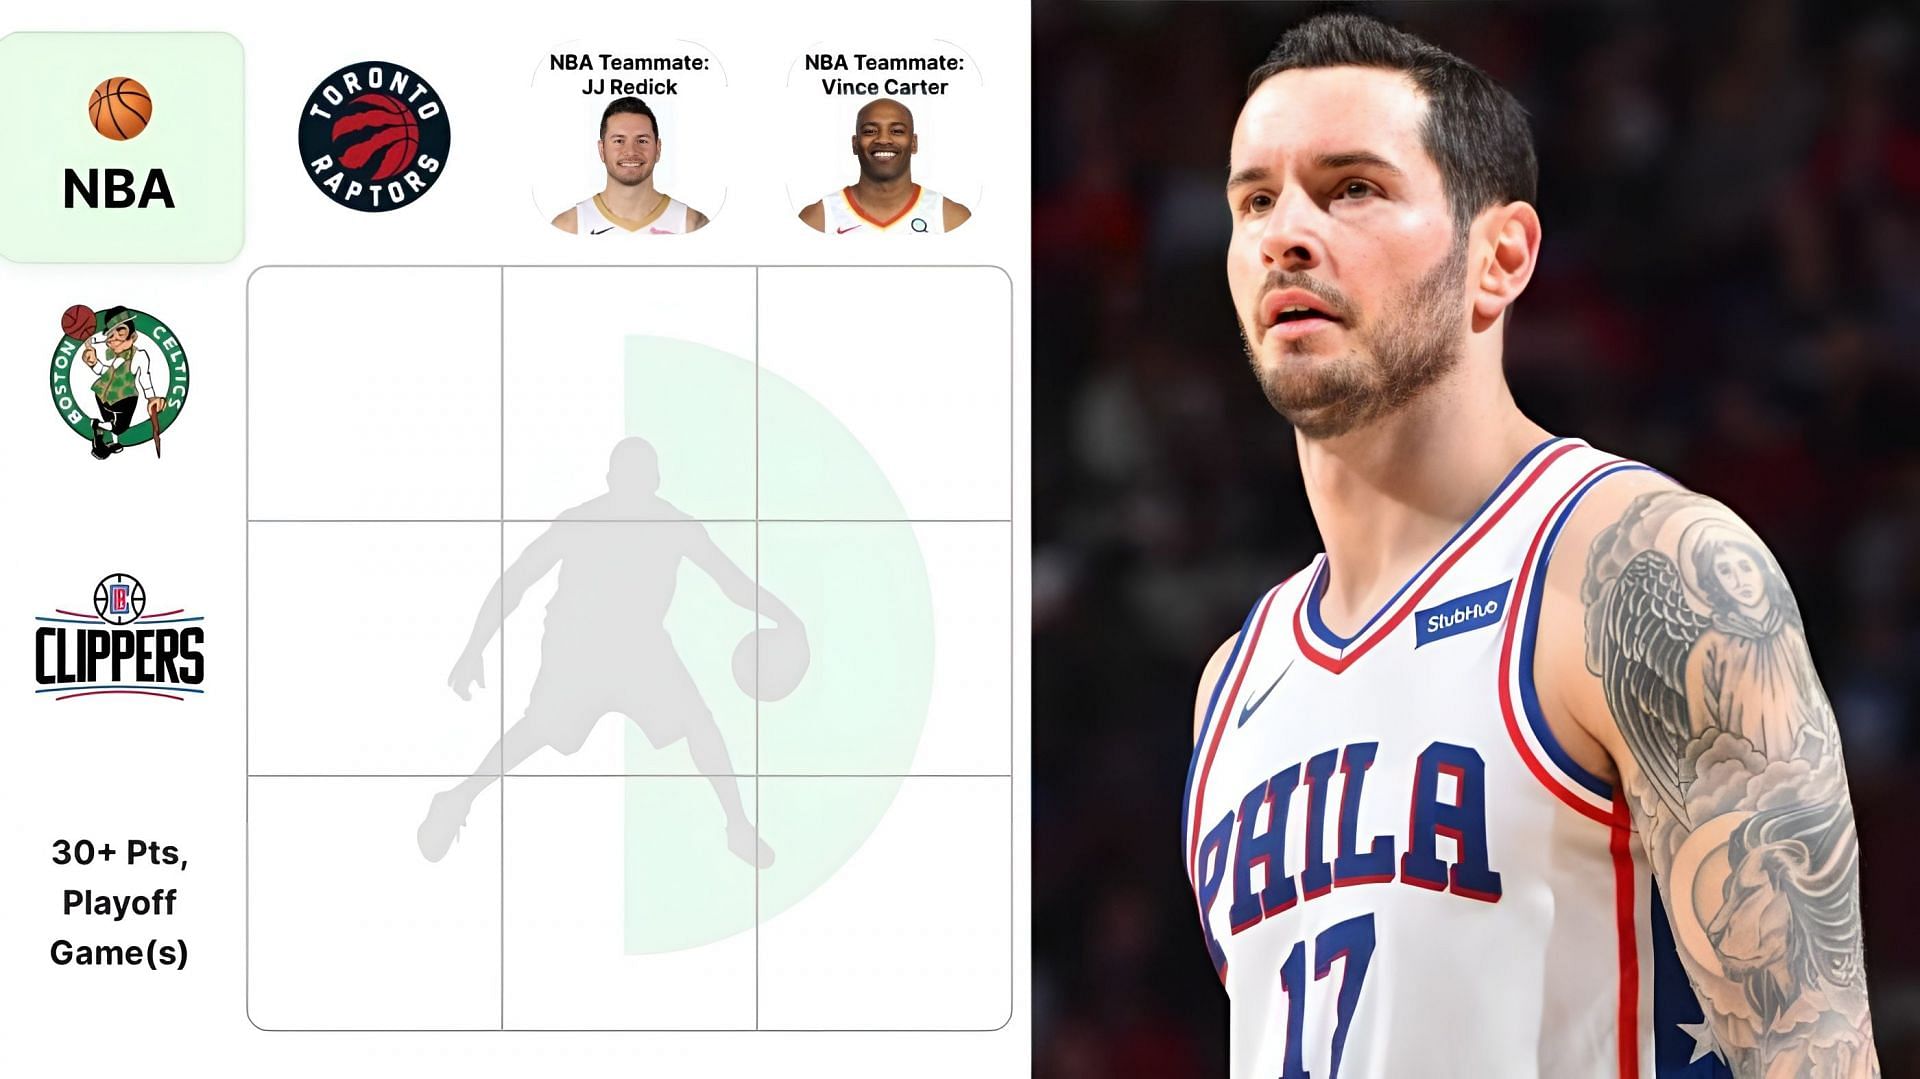 J.J. Redick? Which side are you on? - NetsDaily